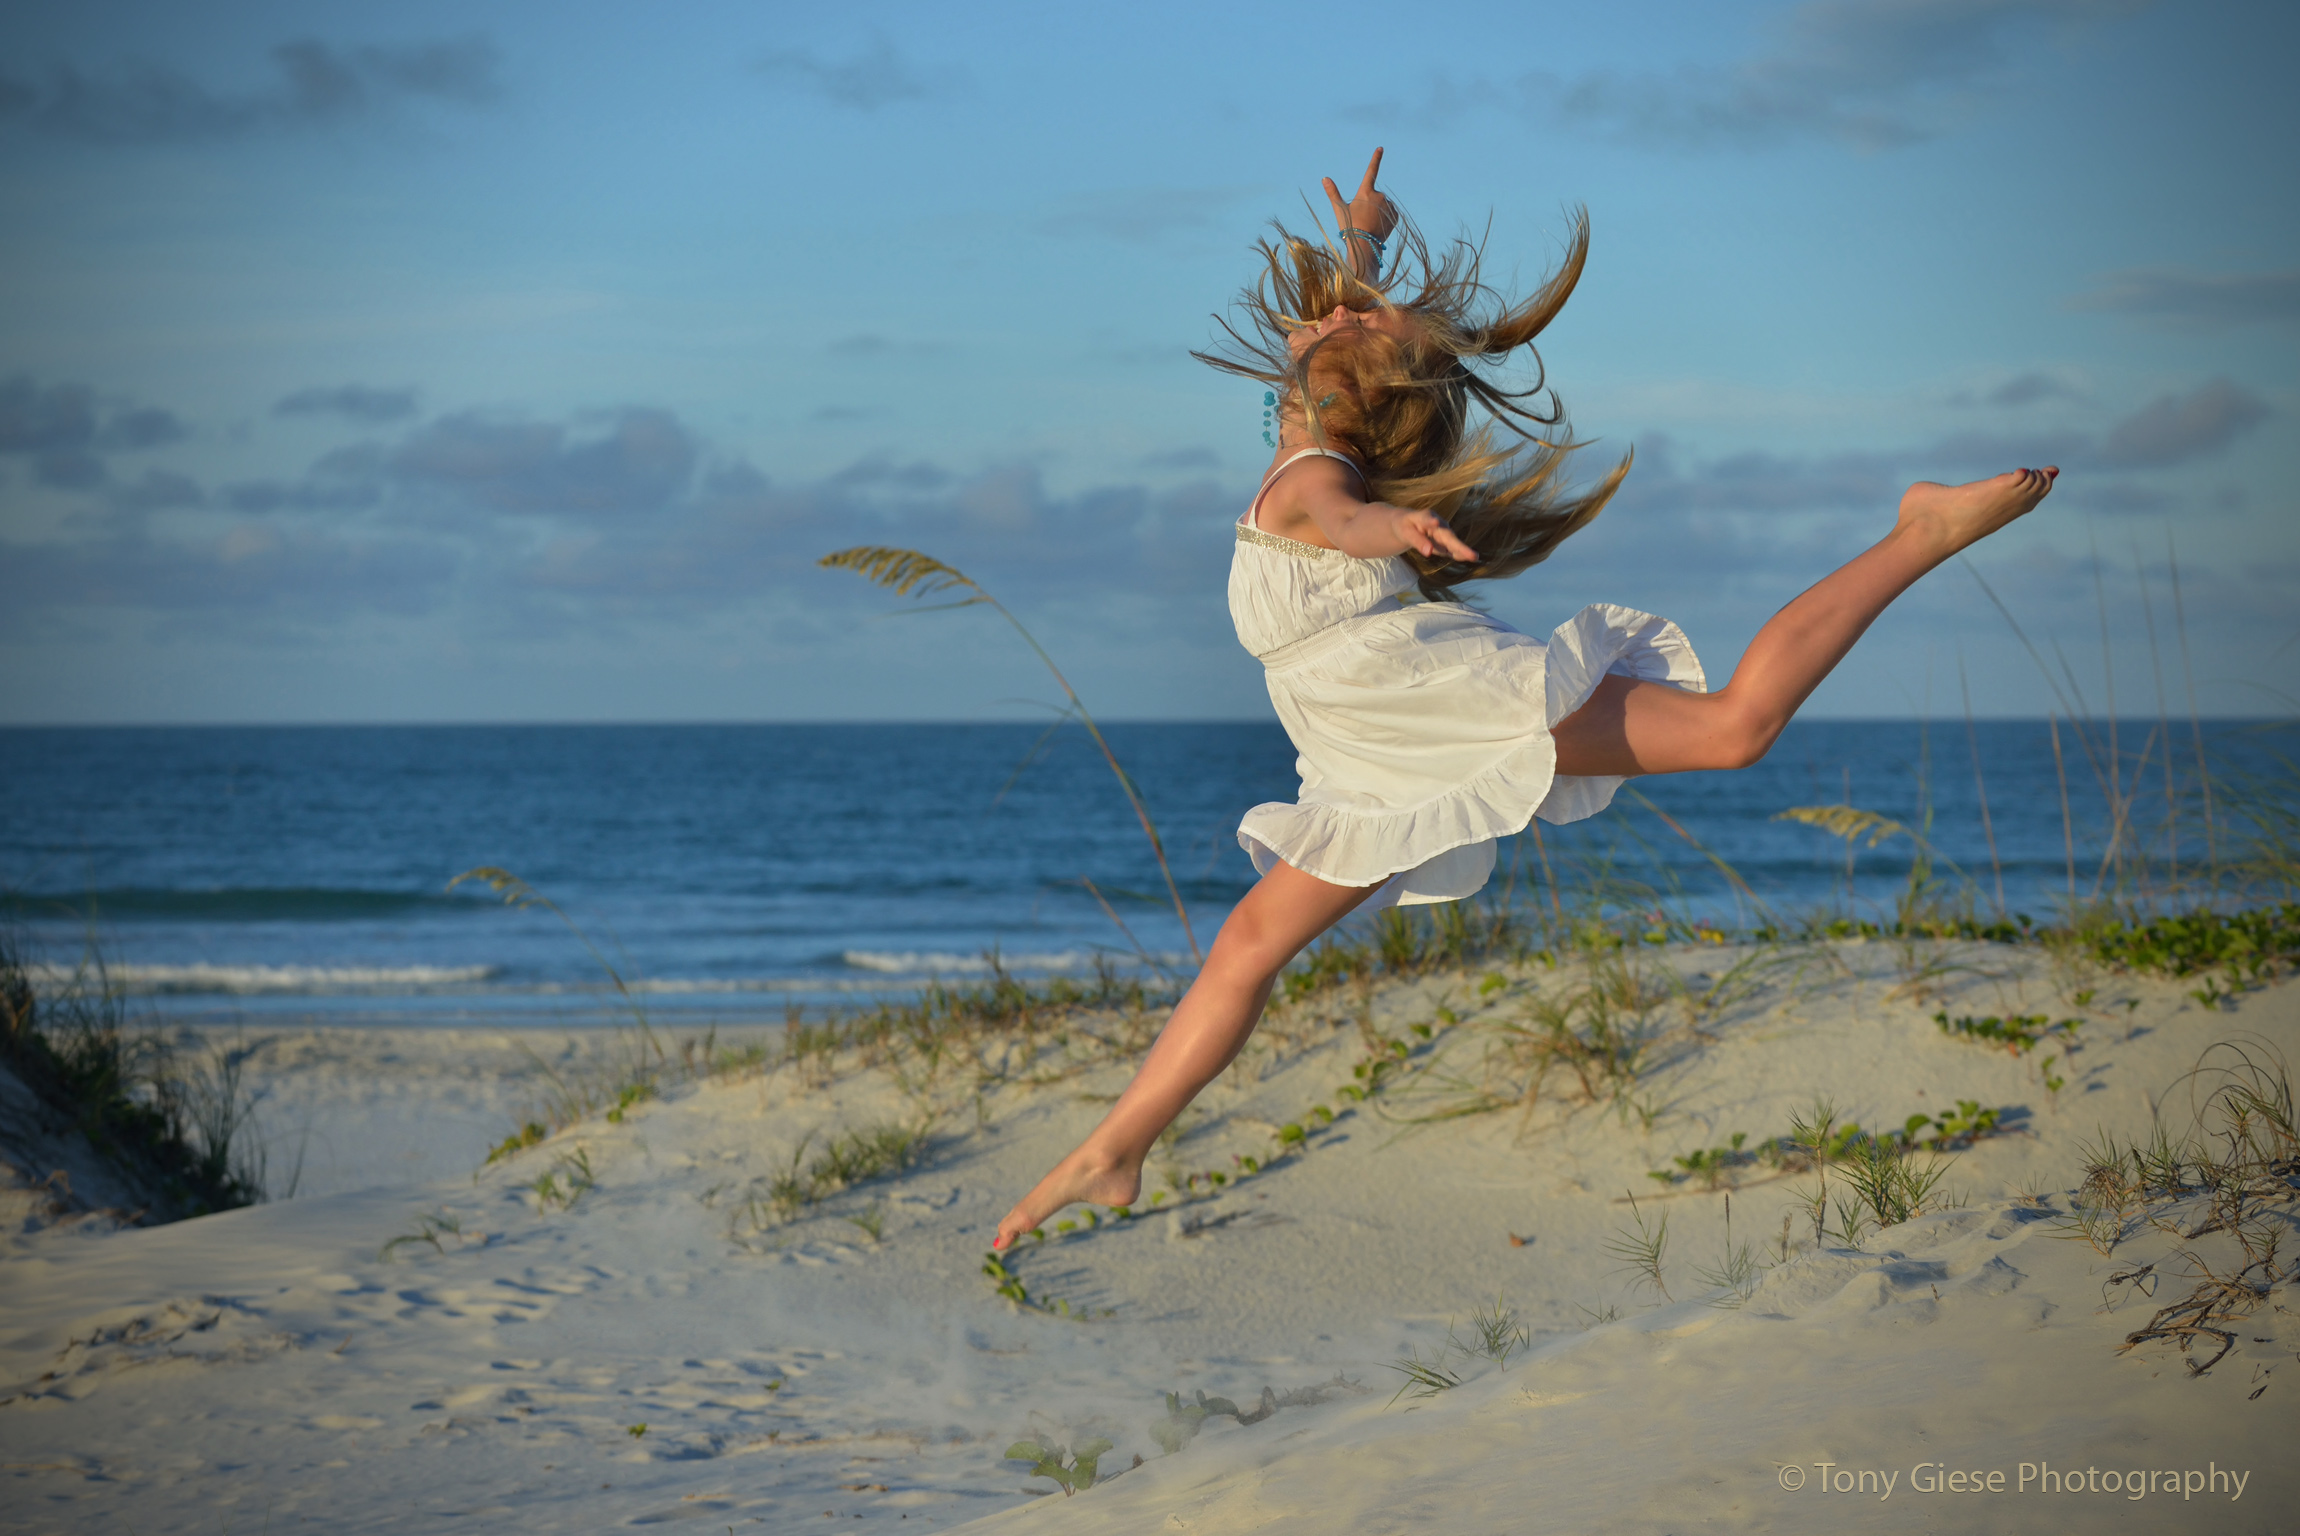 The joy of beautiful dance on Ponce Inlet beach, Florida.